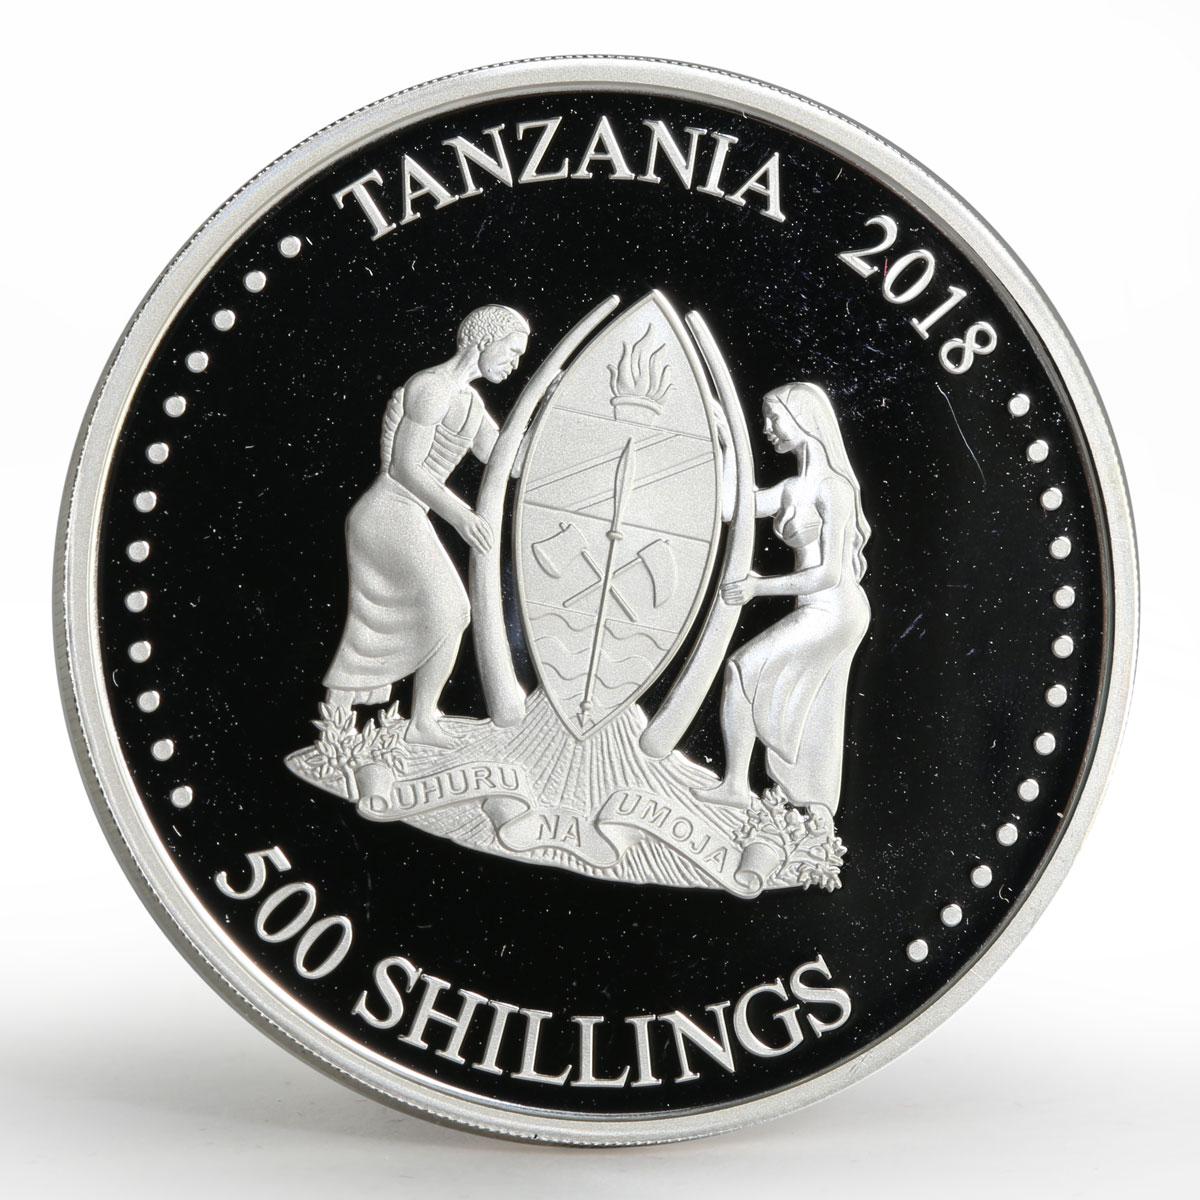 Tanzania 500 shillings Year of the Dog hologram silver coin 2018